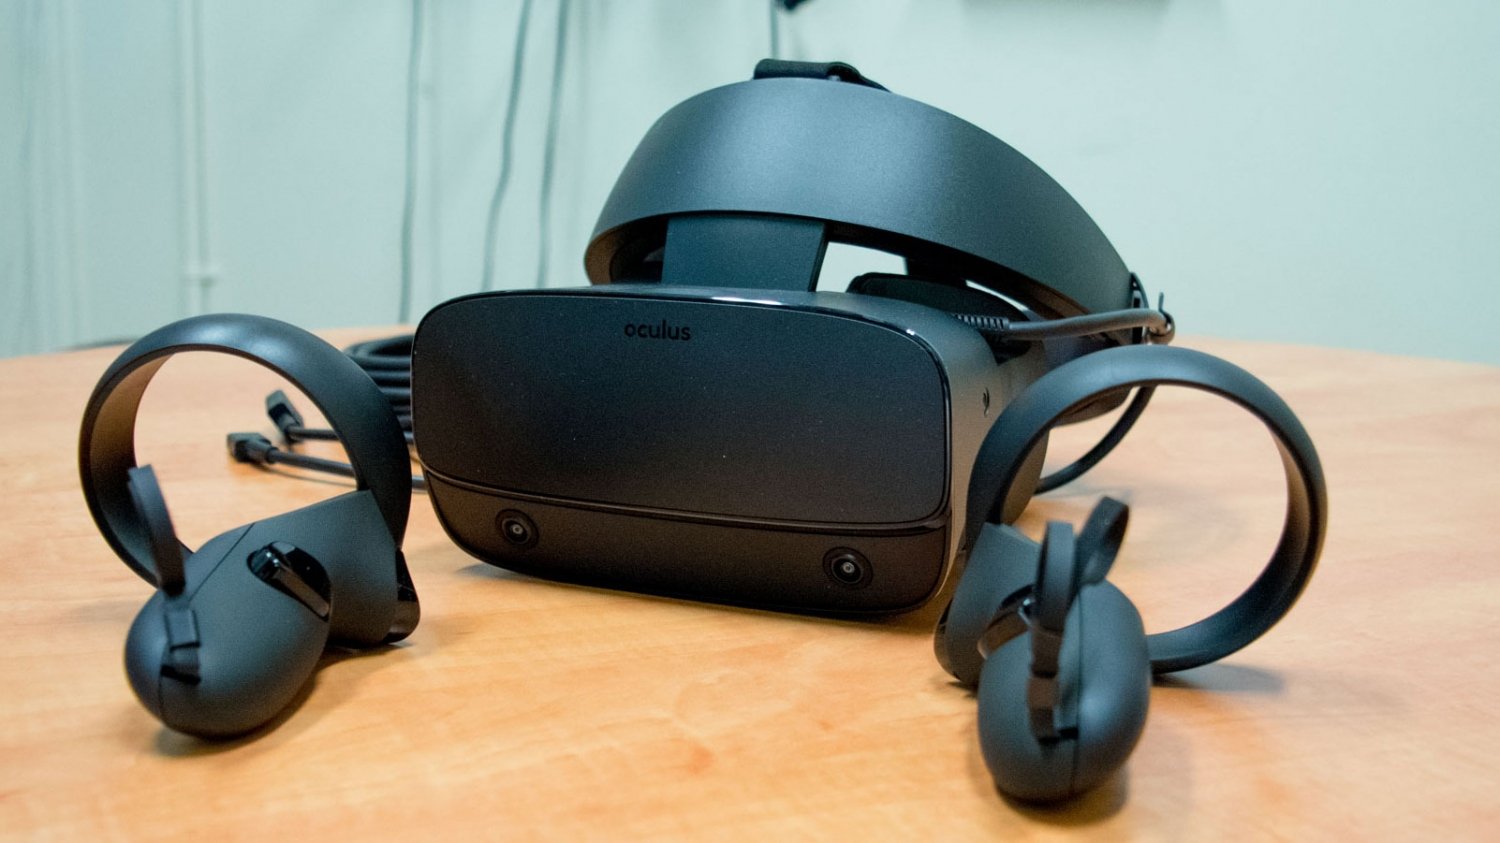 rift-s-is-the-last-pcvr-headset-from-the-oculus-brand